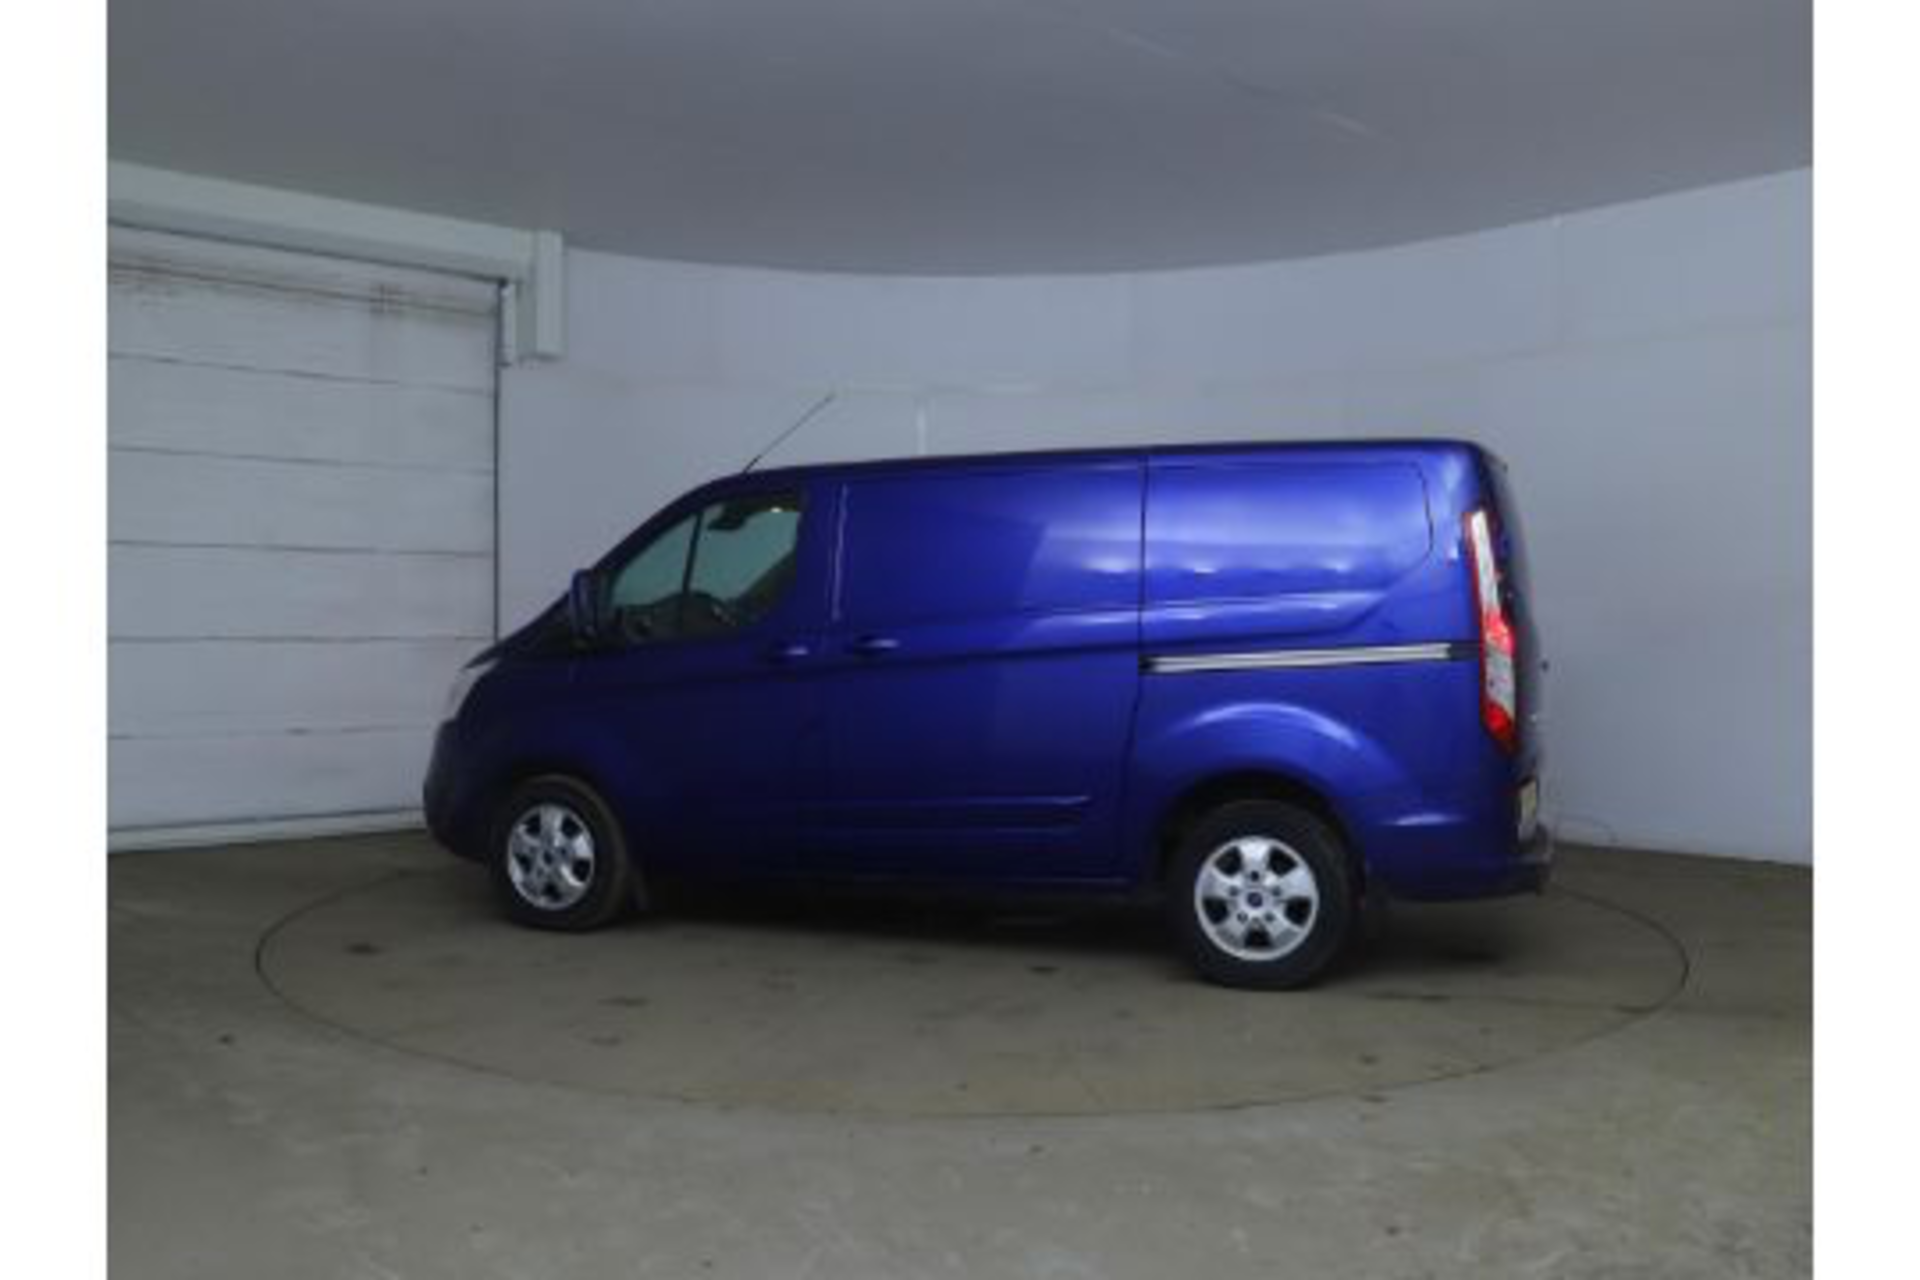 Reserve Met - Ford Transit Custom "Limited" 2.0Tdci (130) Swb - 18 Reg Air Con Alloys - Euro 6 - Image 3 of 11